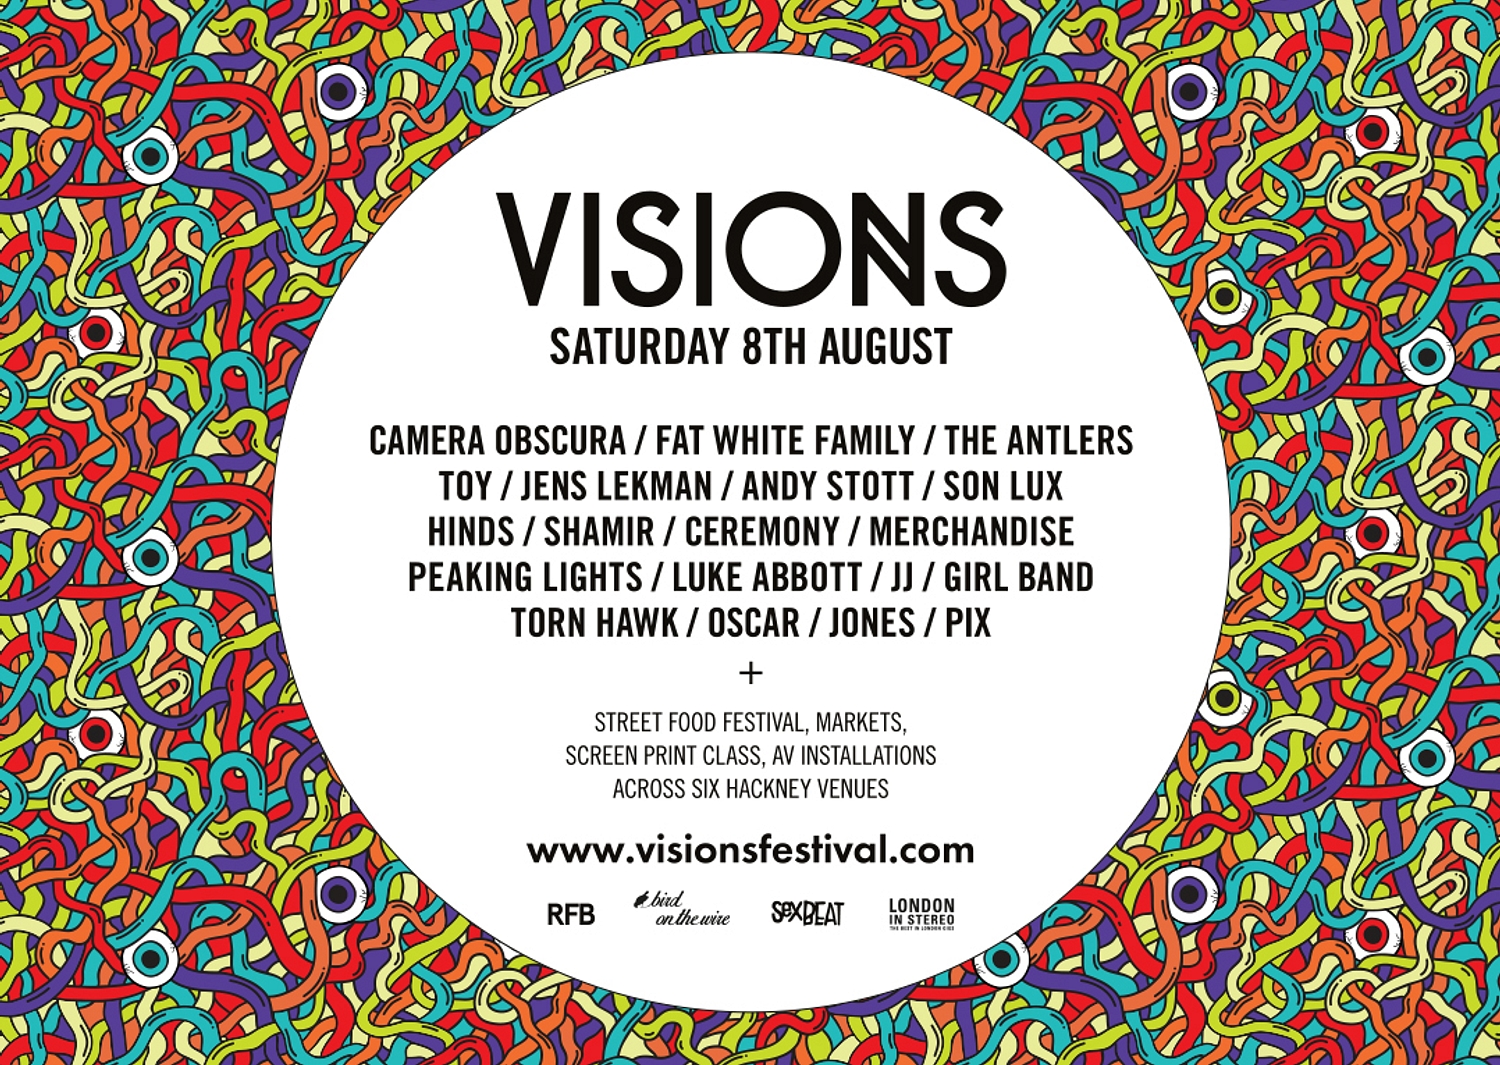 Merchandise, Shamir, Ceremony to play London’s VISIONS Festival